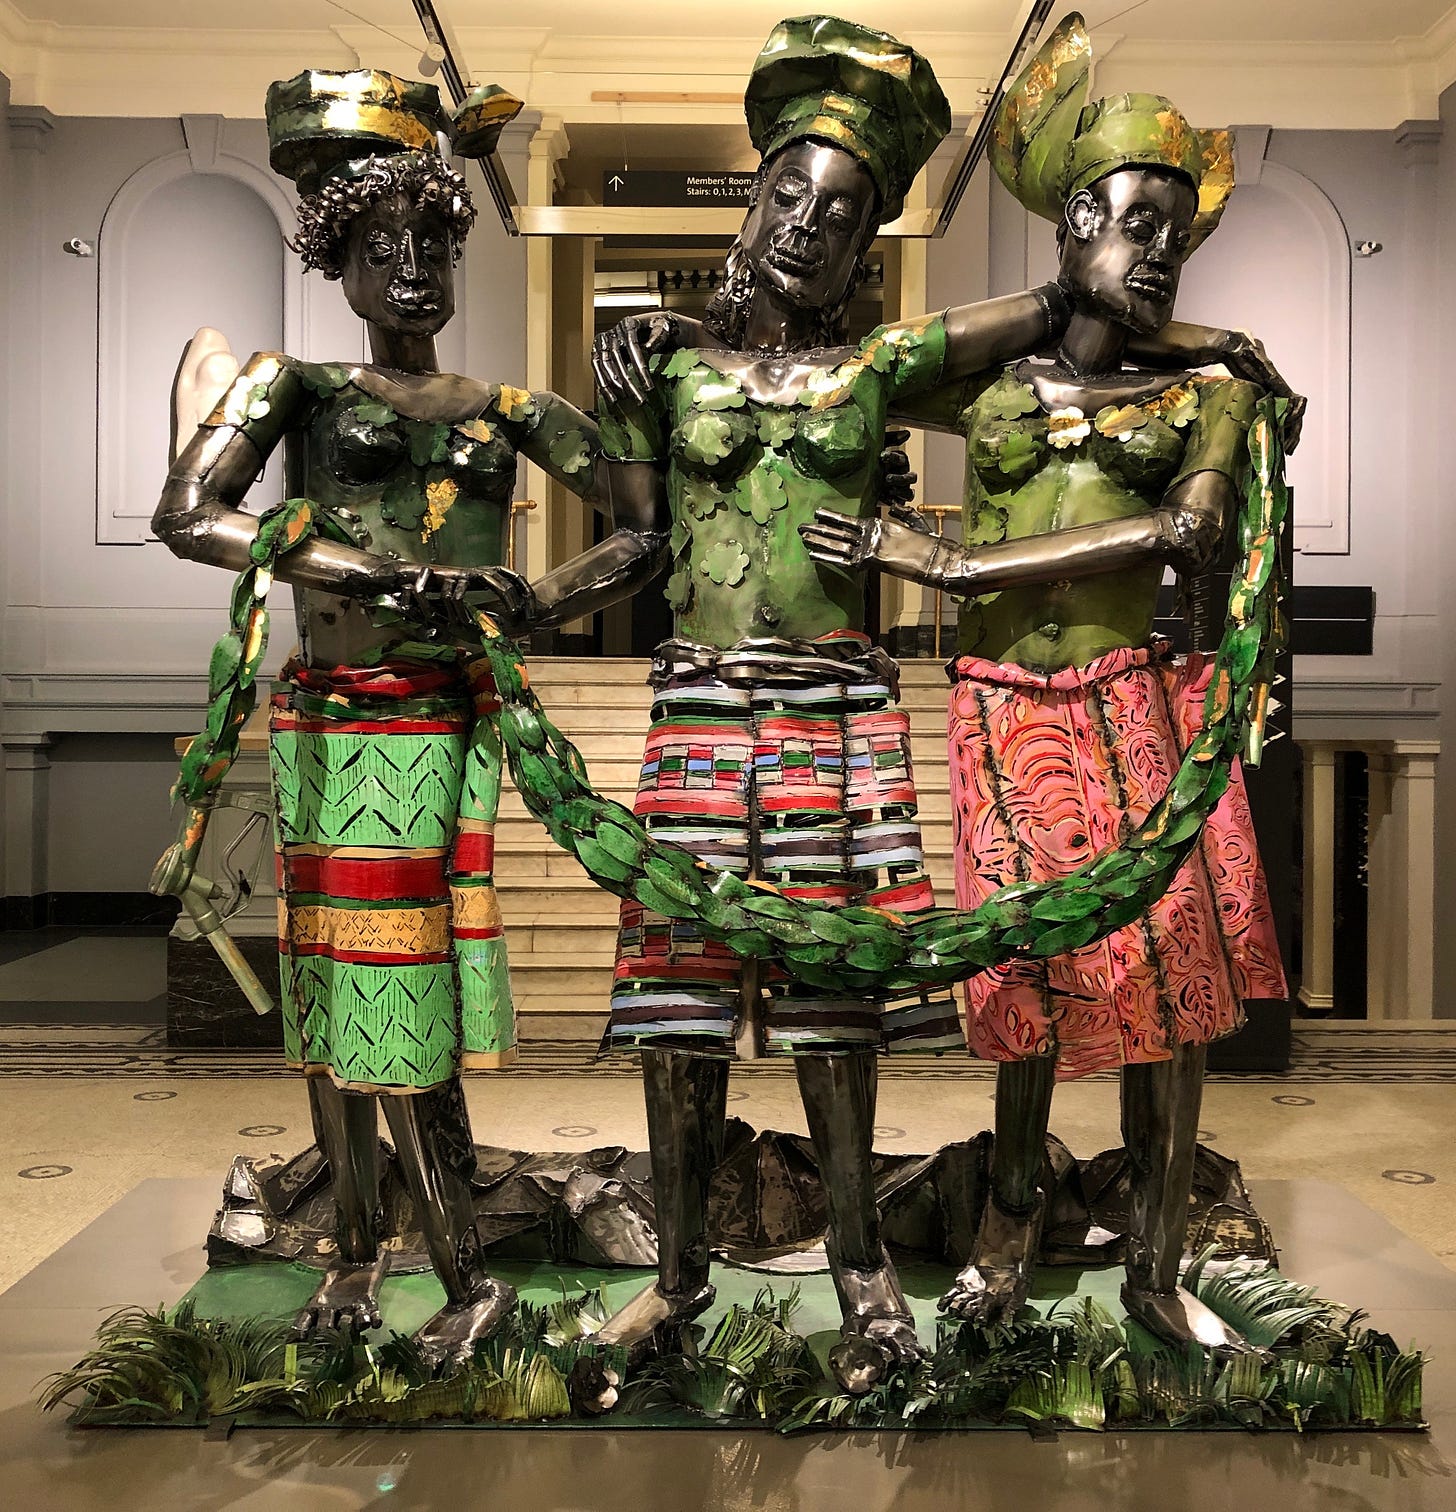 A sculpture of three metallic female figures stand in a row, on a pedestal simulating a grassy floor, in a museum gallery. The outer figures support the central figure. All three wear skirts and headdresses.